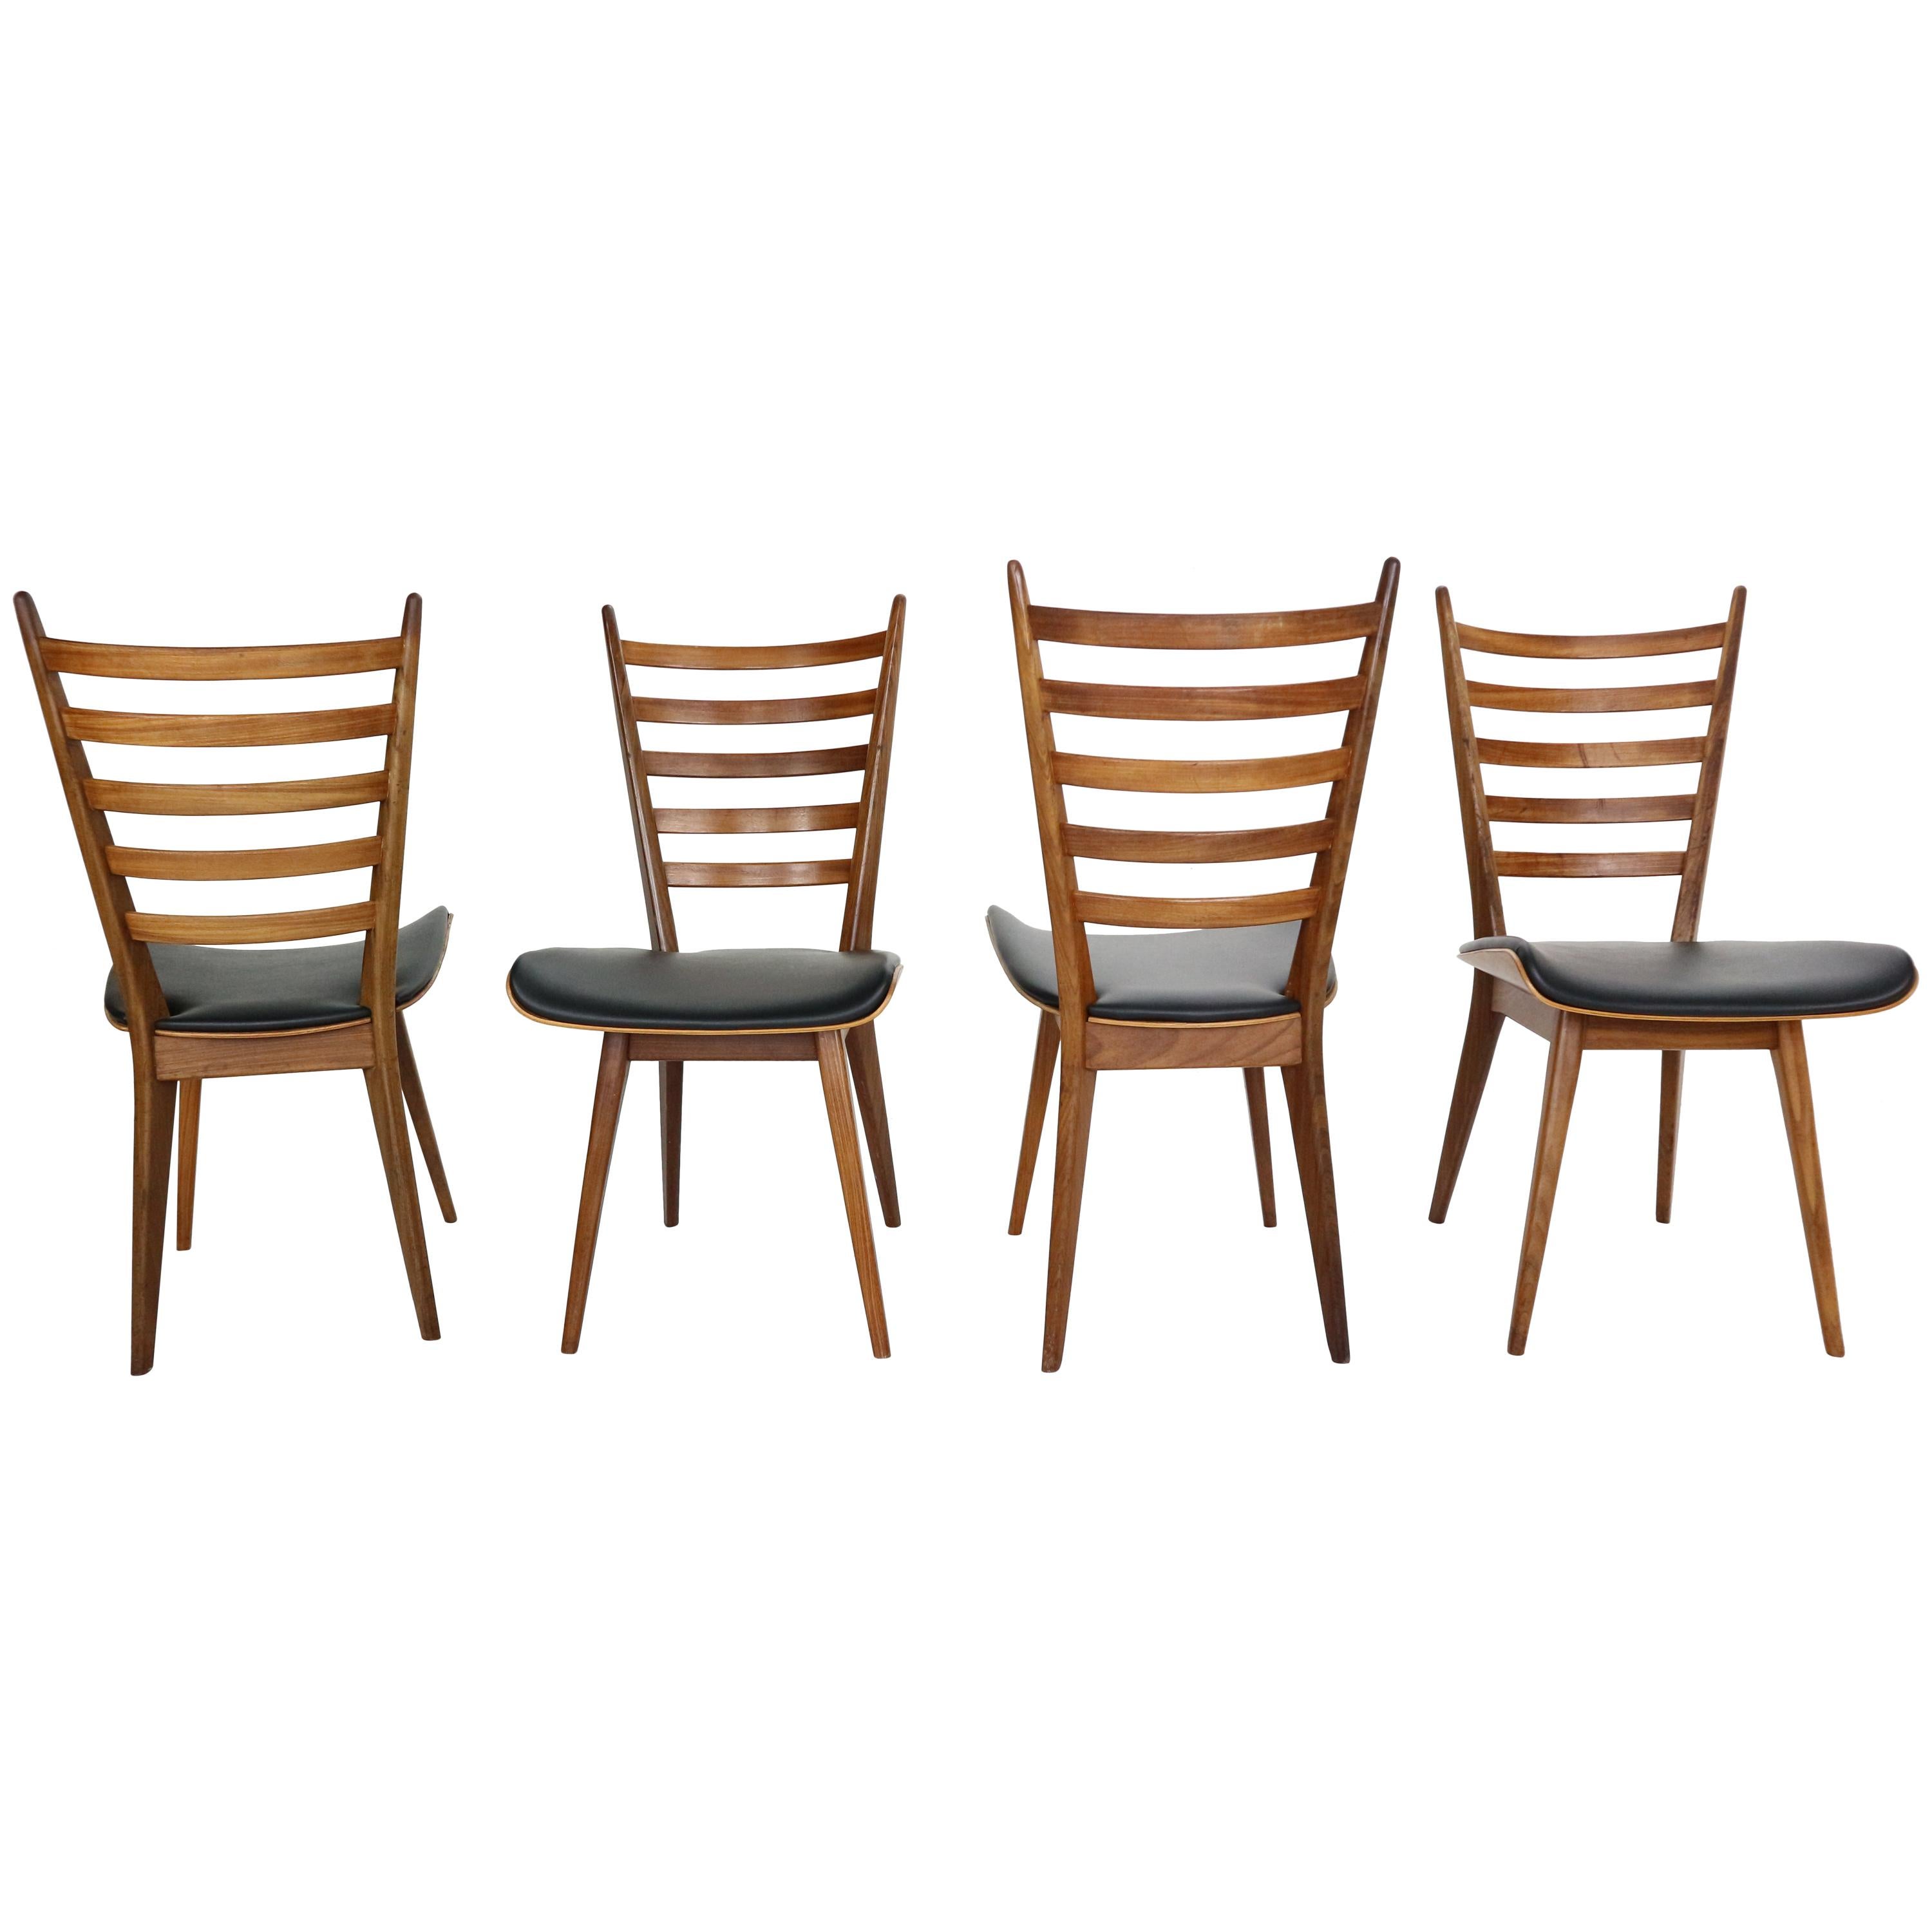 Set of 4 Dinning Room Chairs by Cees Braakman for Pastoe, 1960s Netherlands